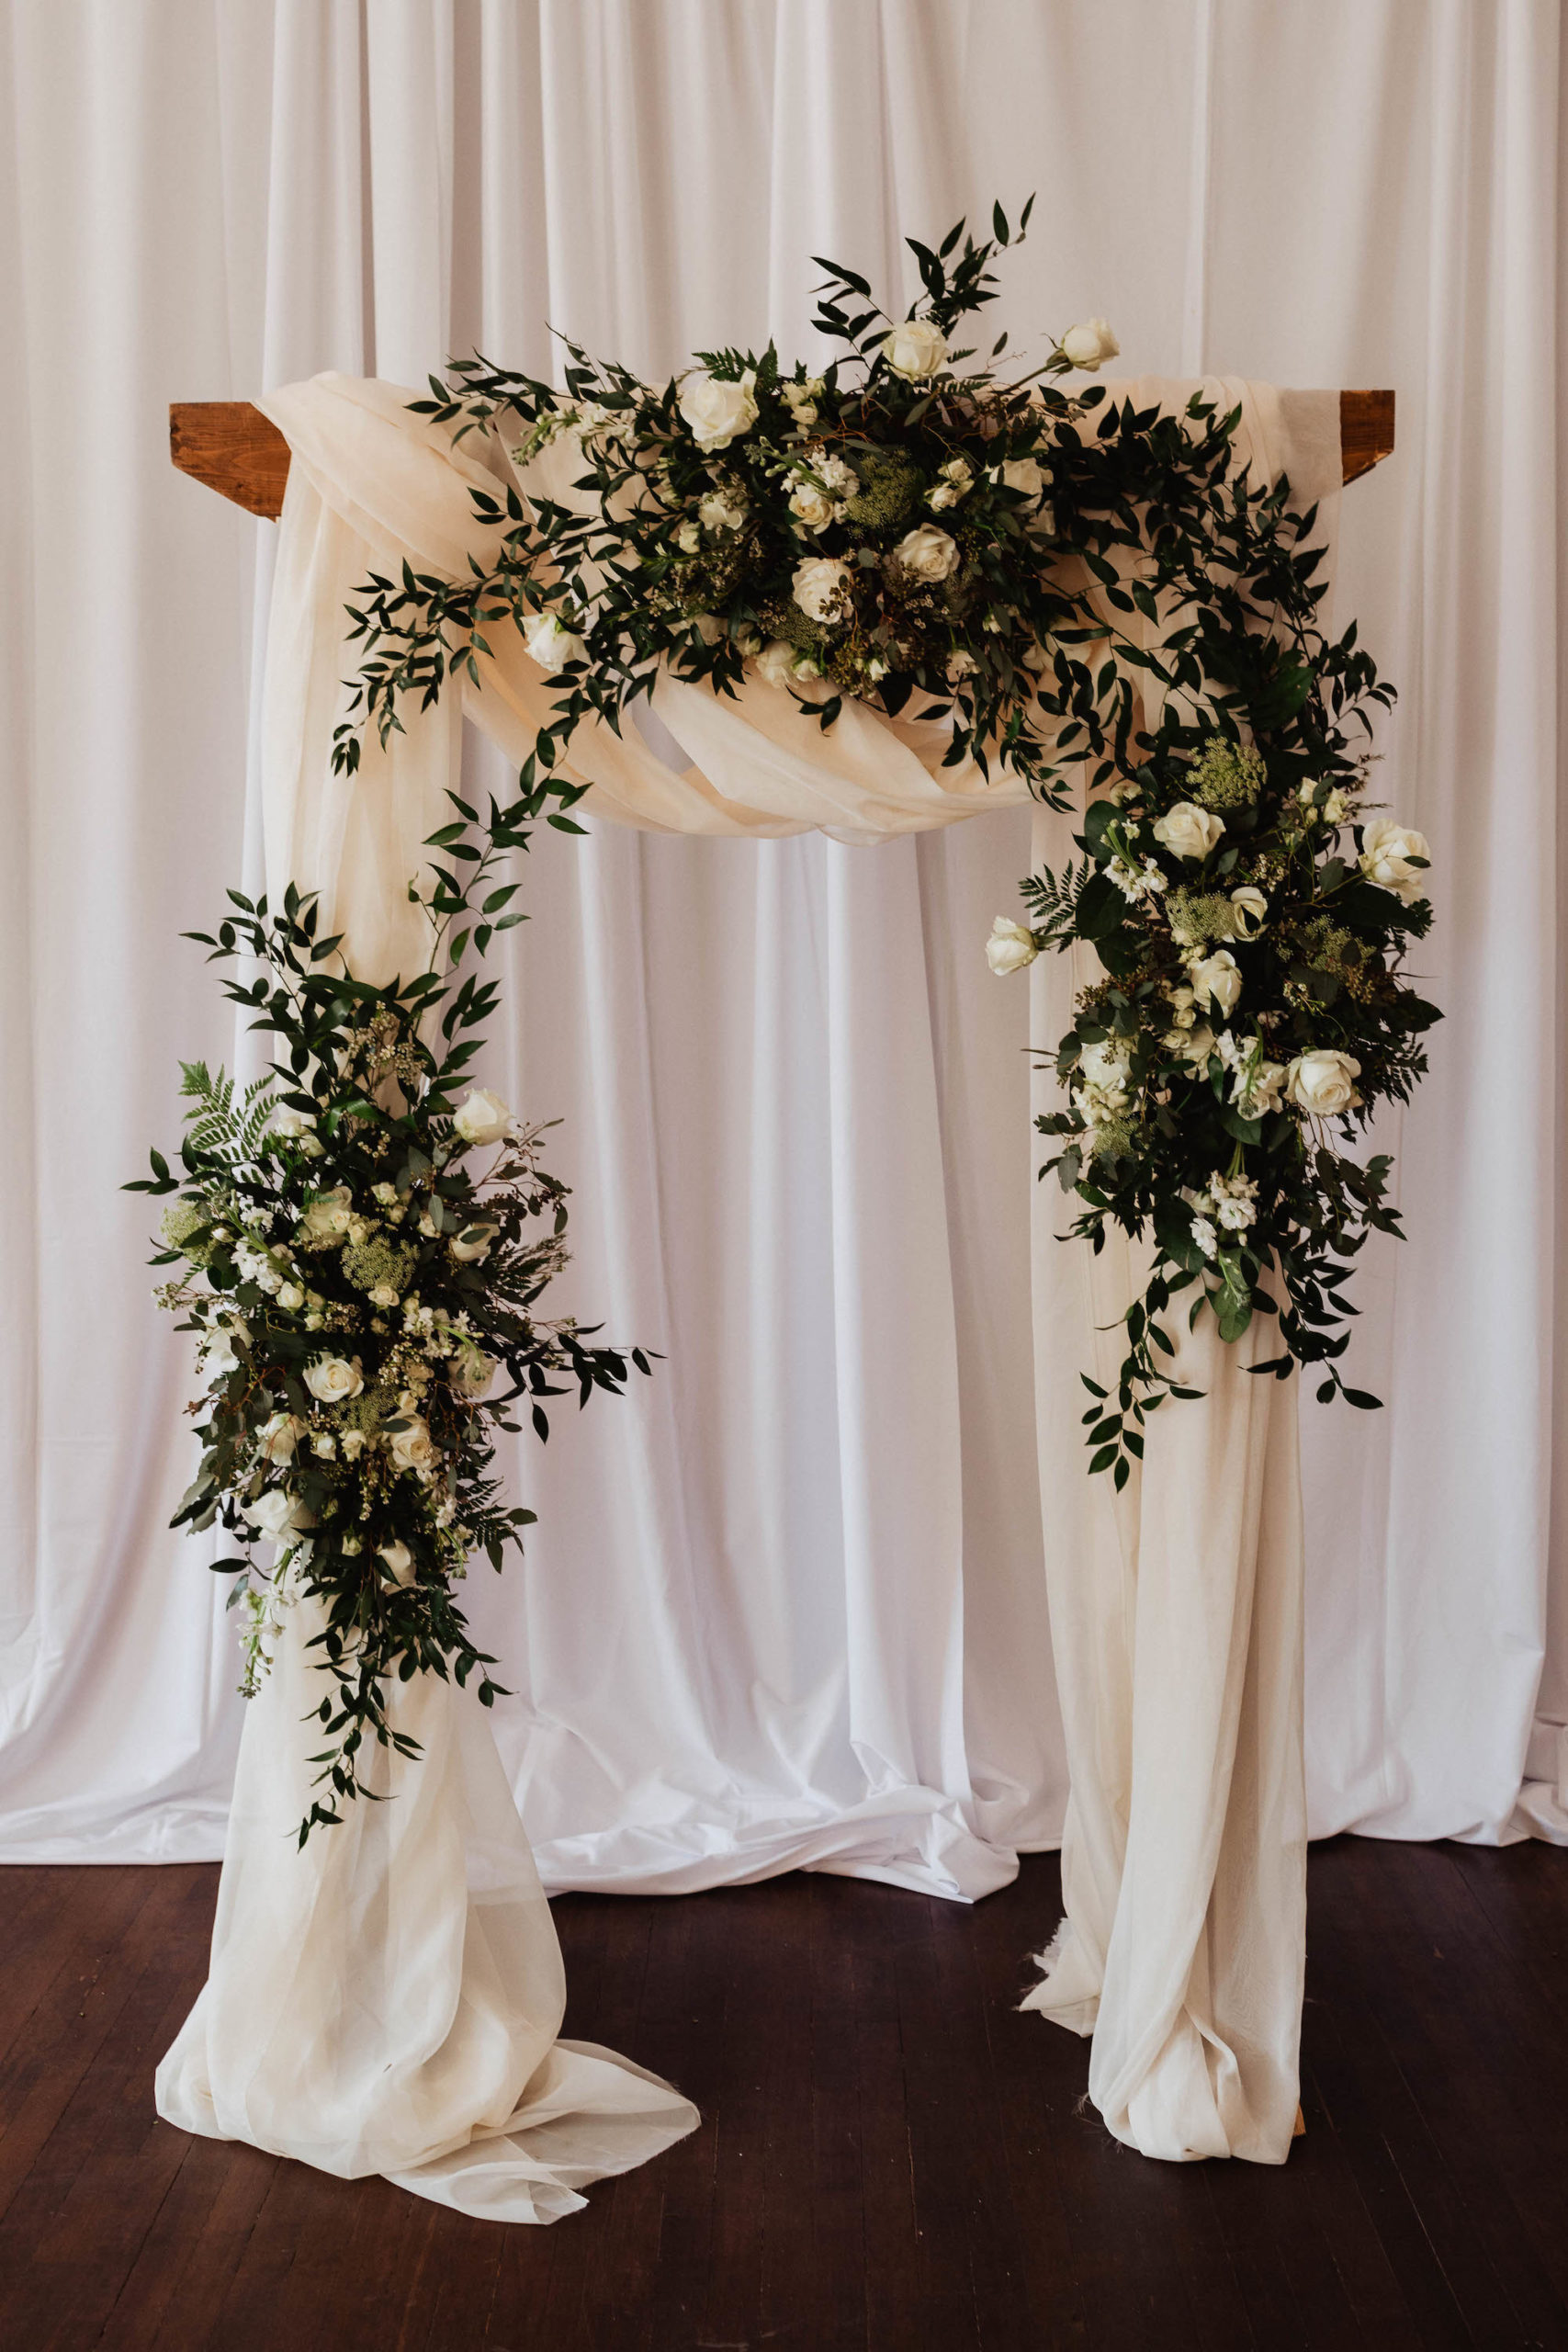 Simple, Elegant Wedding Ceremony Decor, Arch with White Draping and Greenery Eucalyptus and Ivory Roses Arch